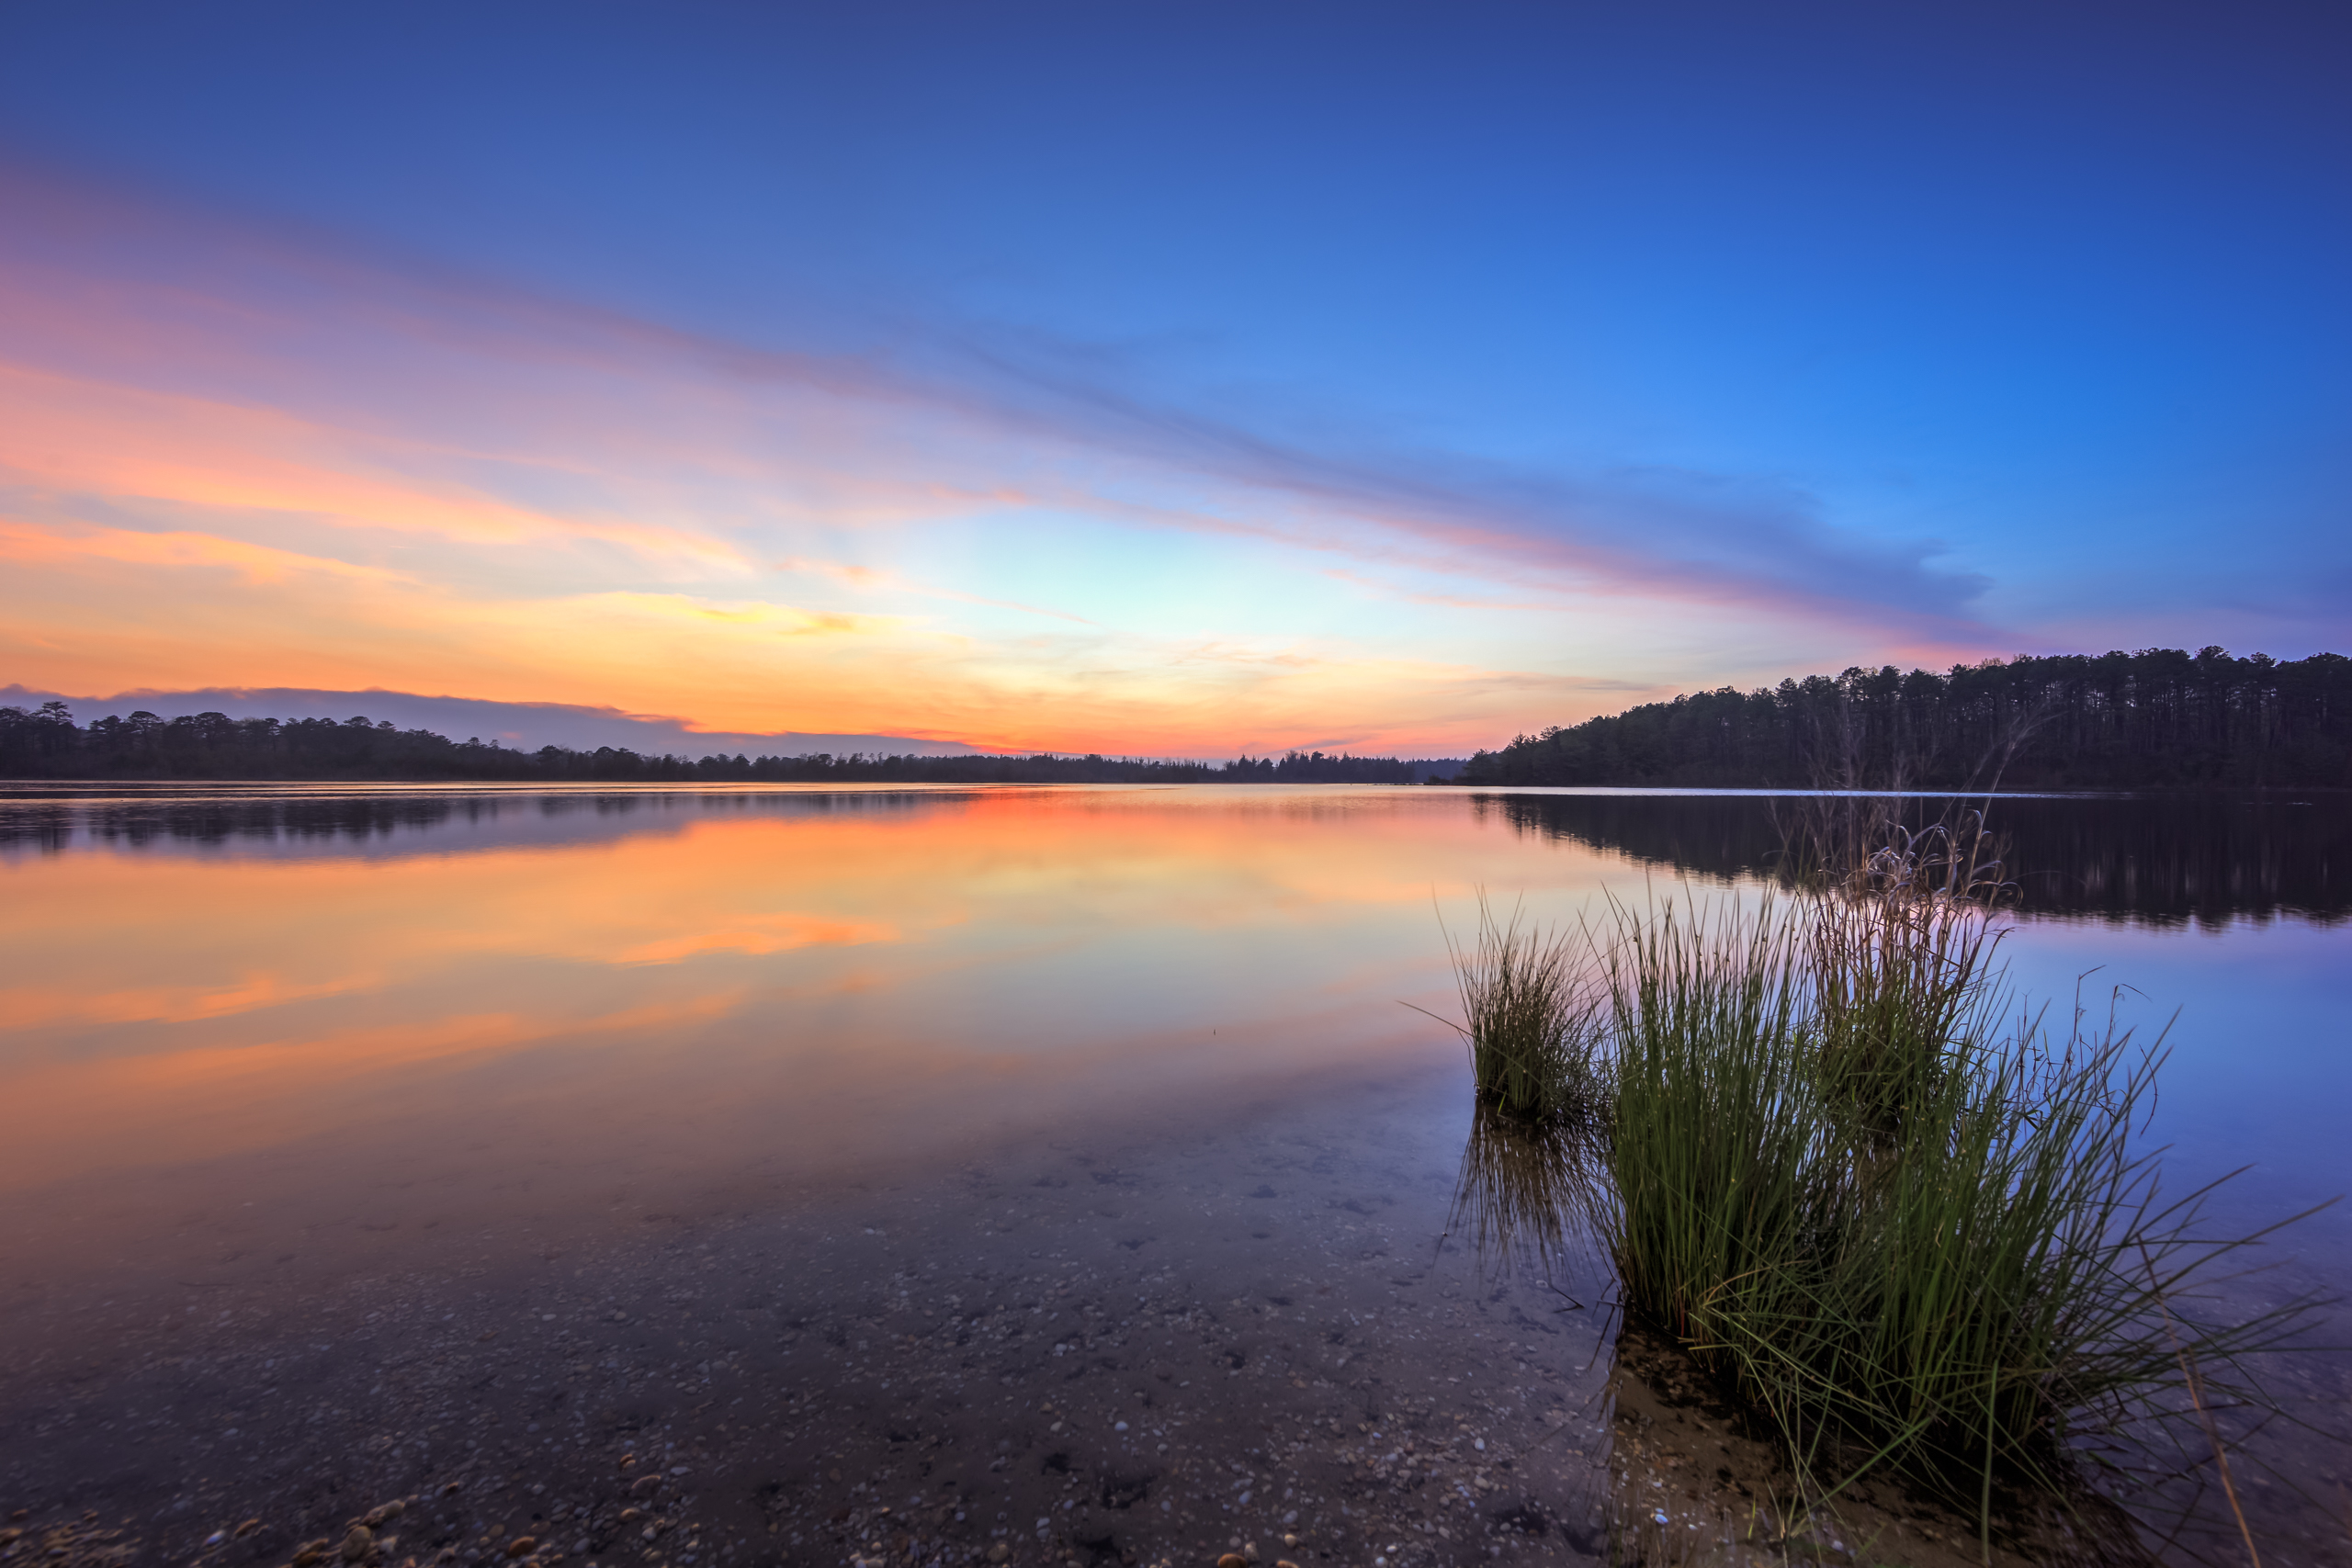 Pastel sunset photo reflected over a glassy lake at Stafford Forge Wildlife Management Area